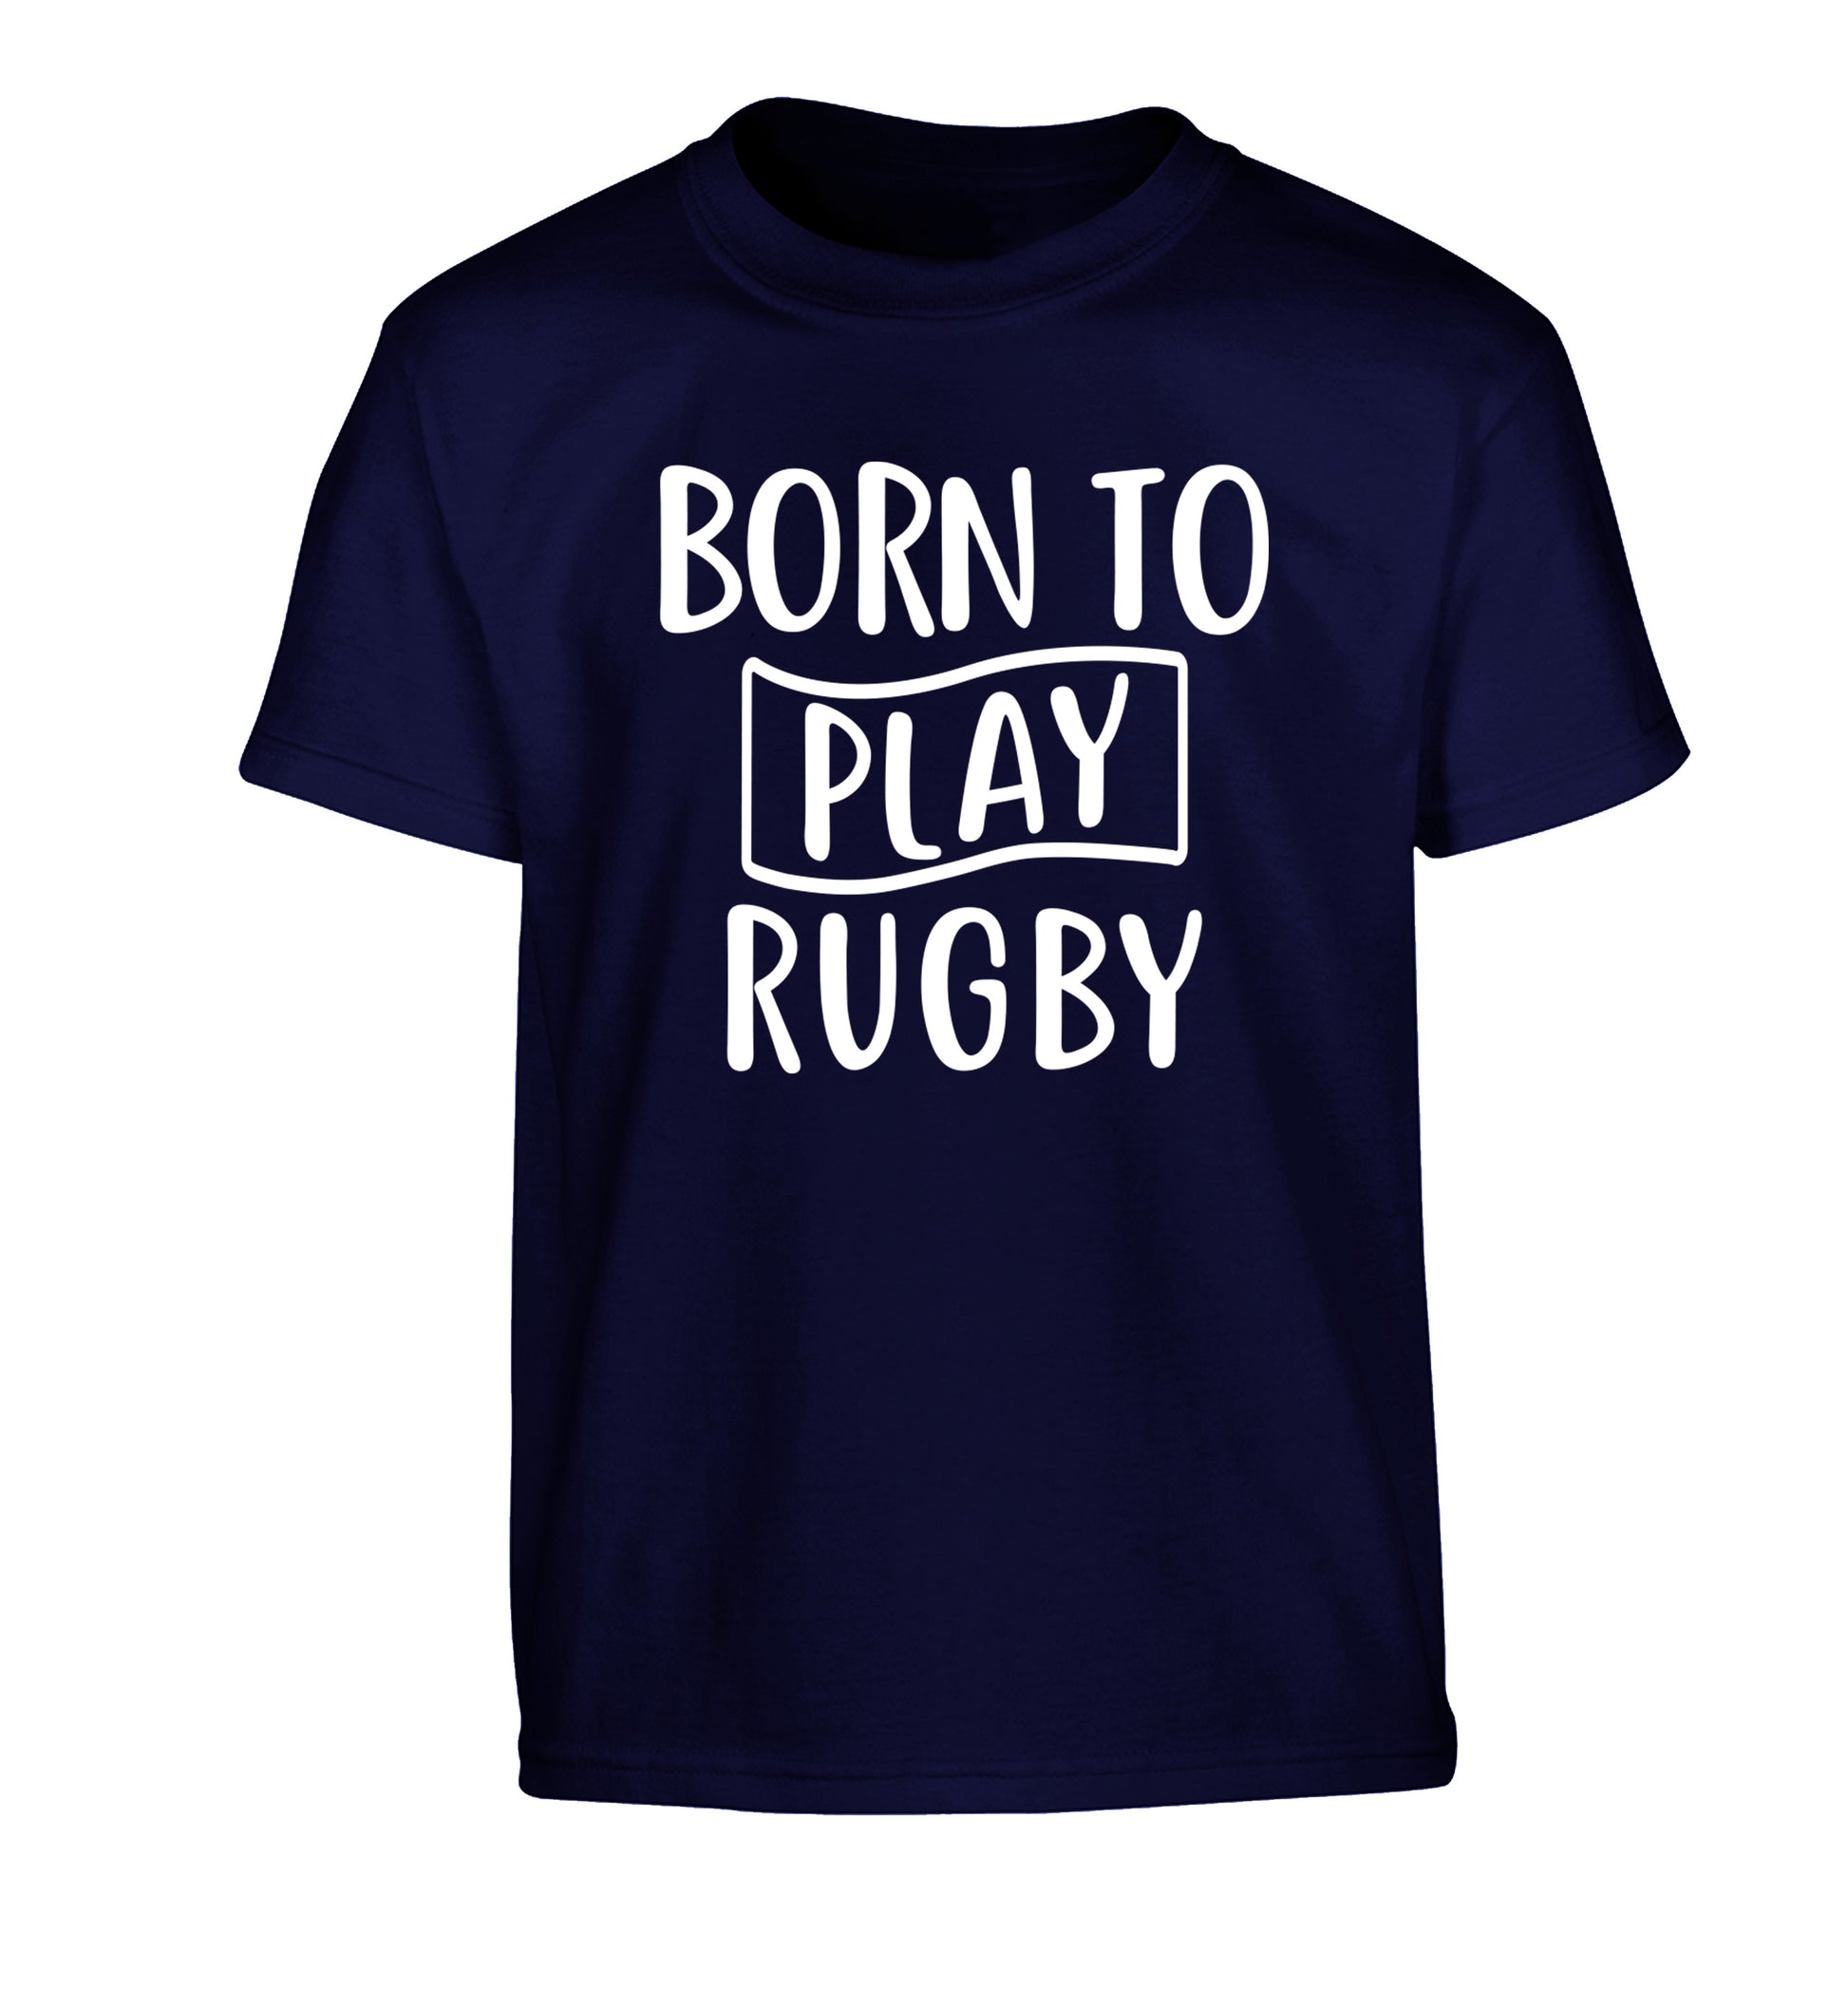 Born to play rugby Children's navy Tshirt 12-13 Years